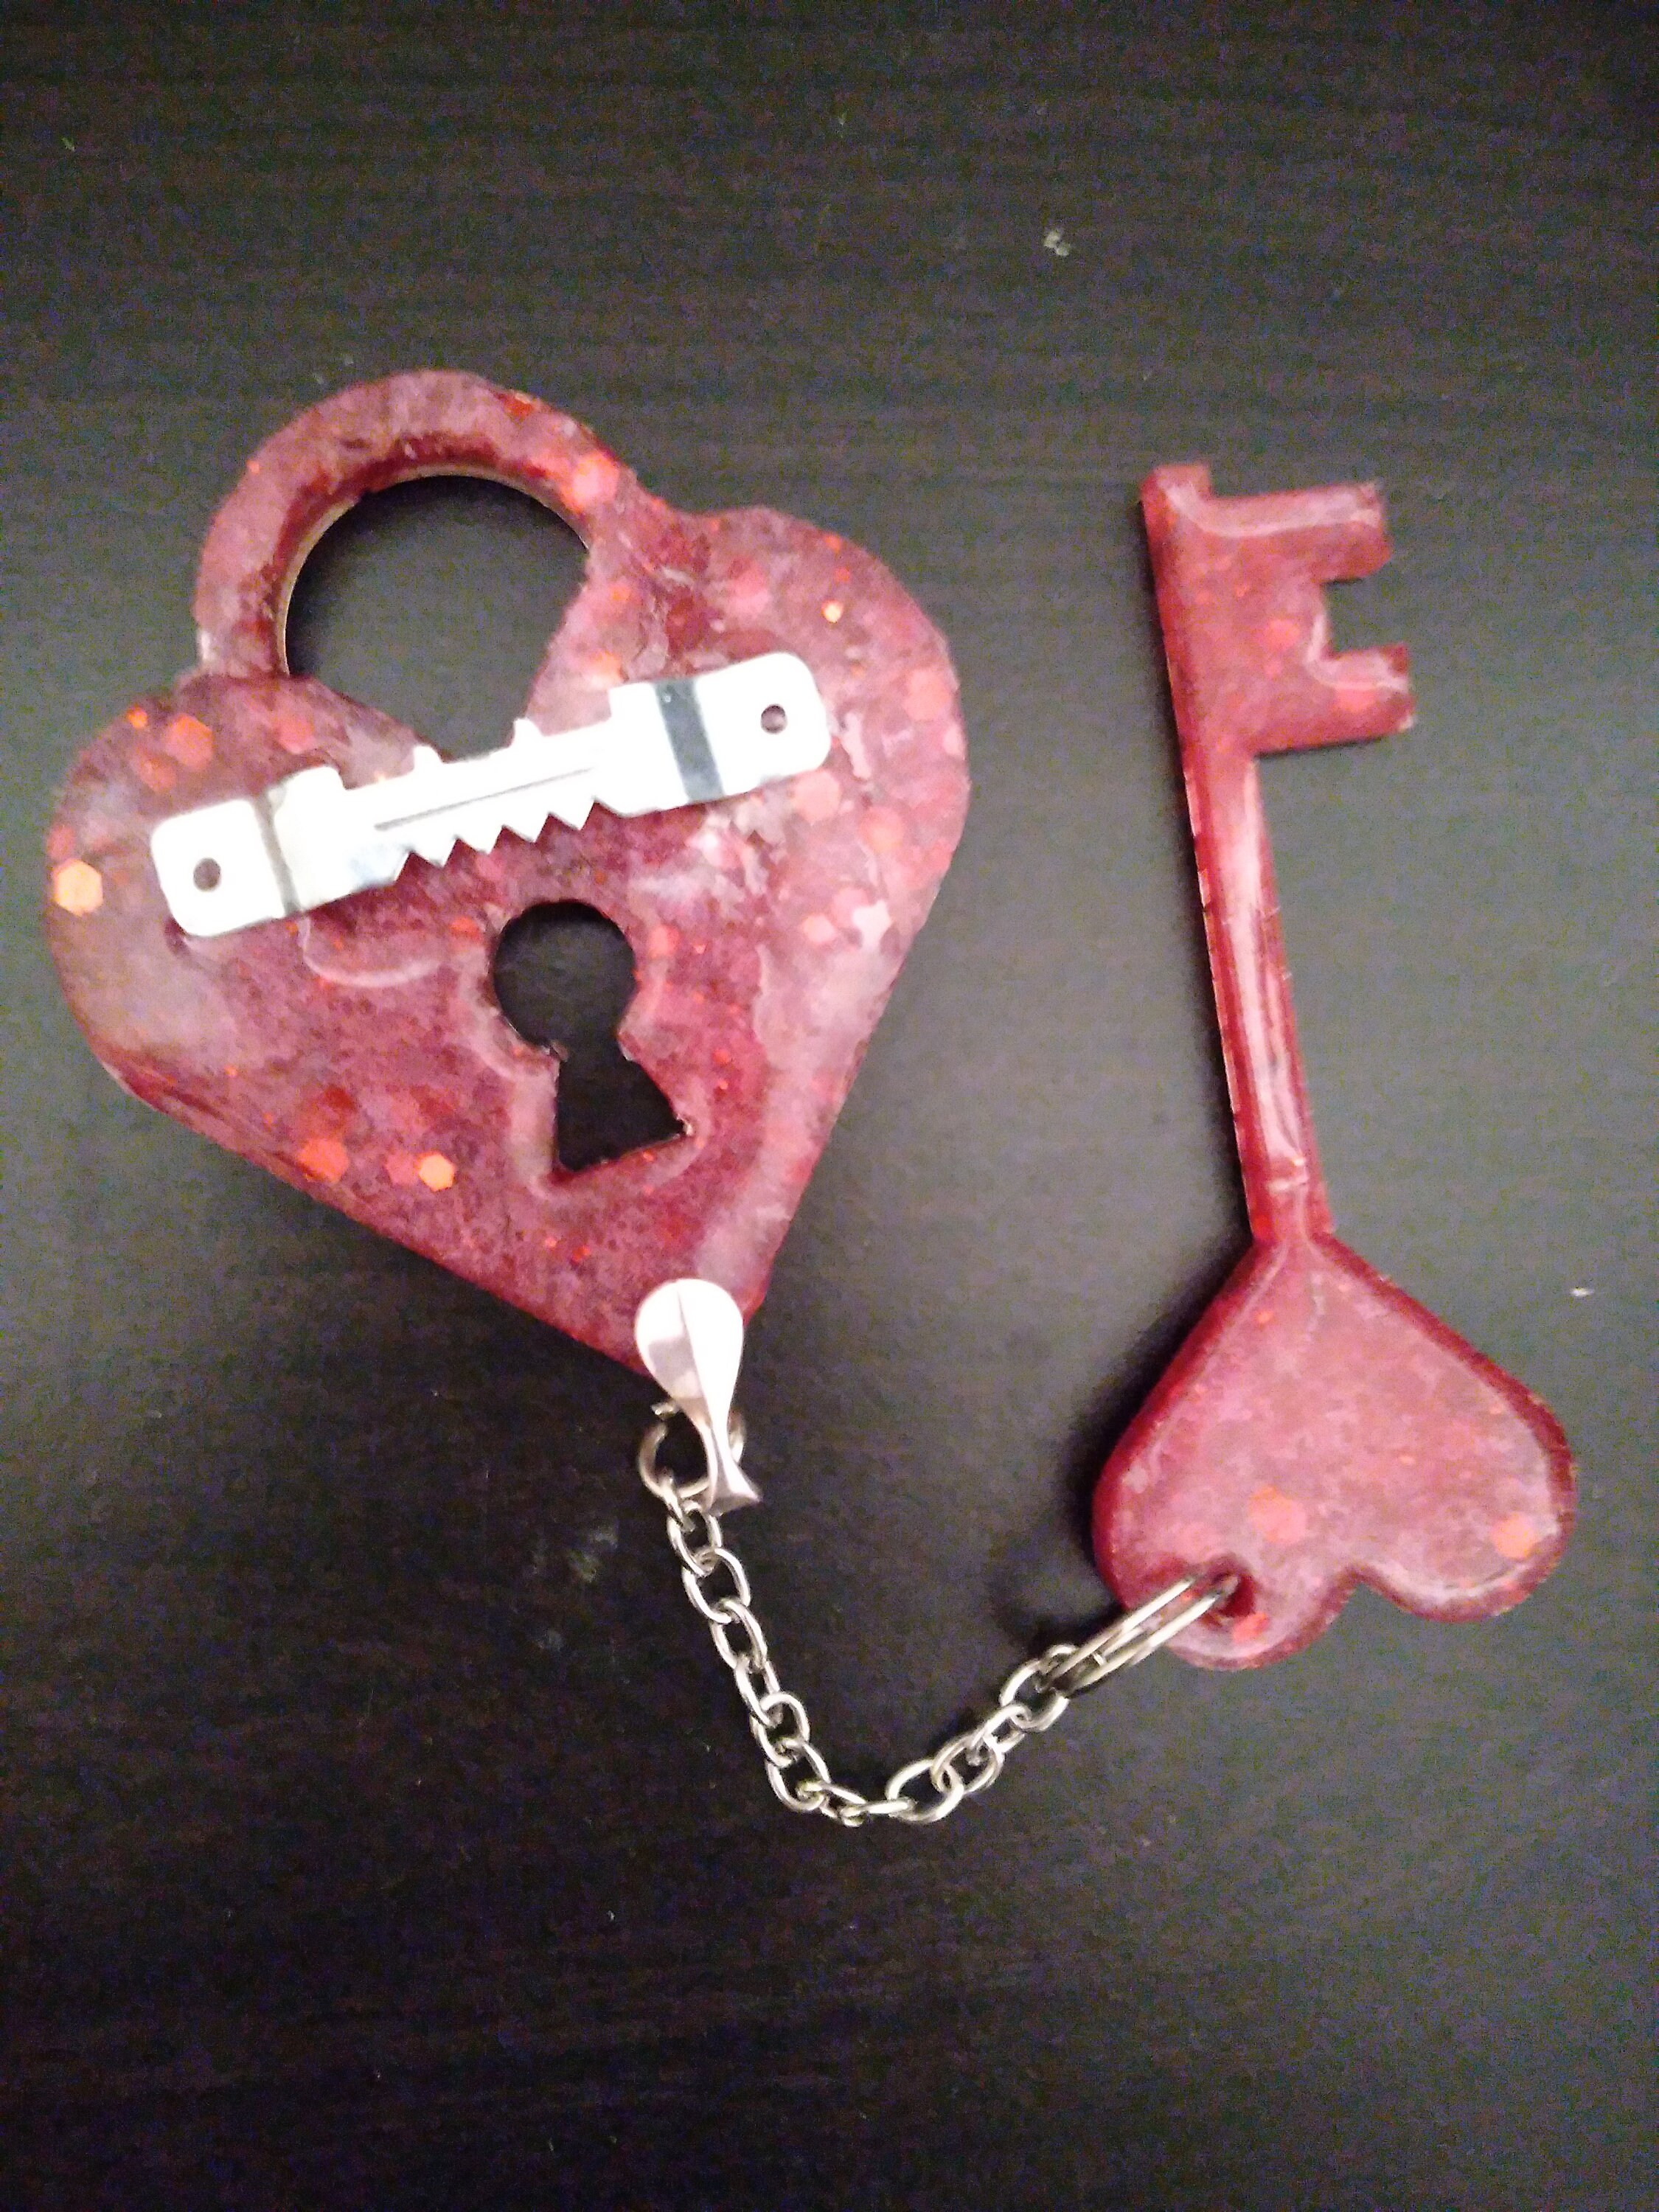 Heart Lock and Key available as Framed Prints, Photos, Wall Art and Photo  Gifts